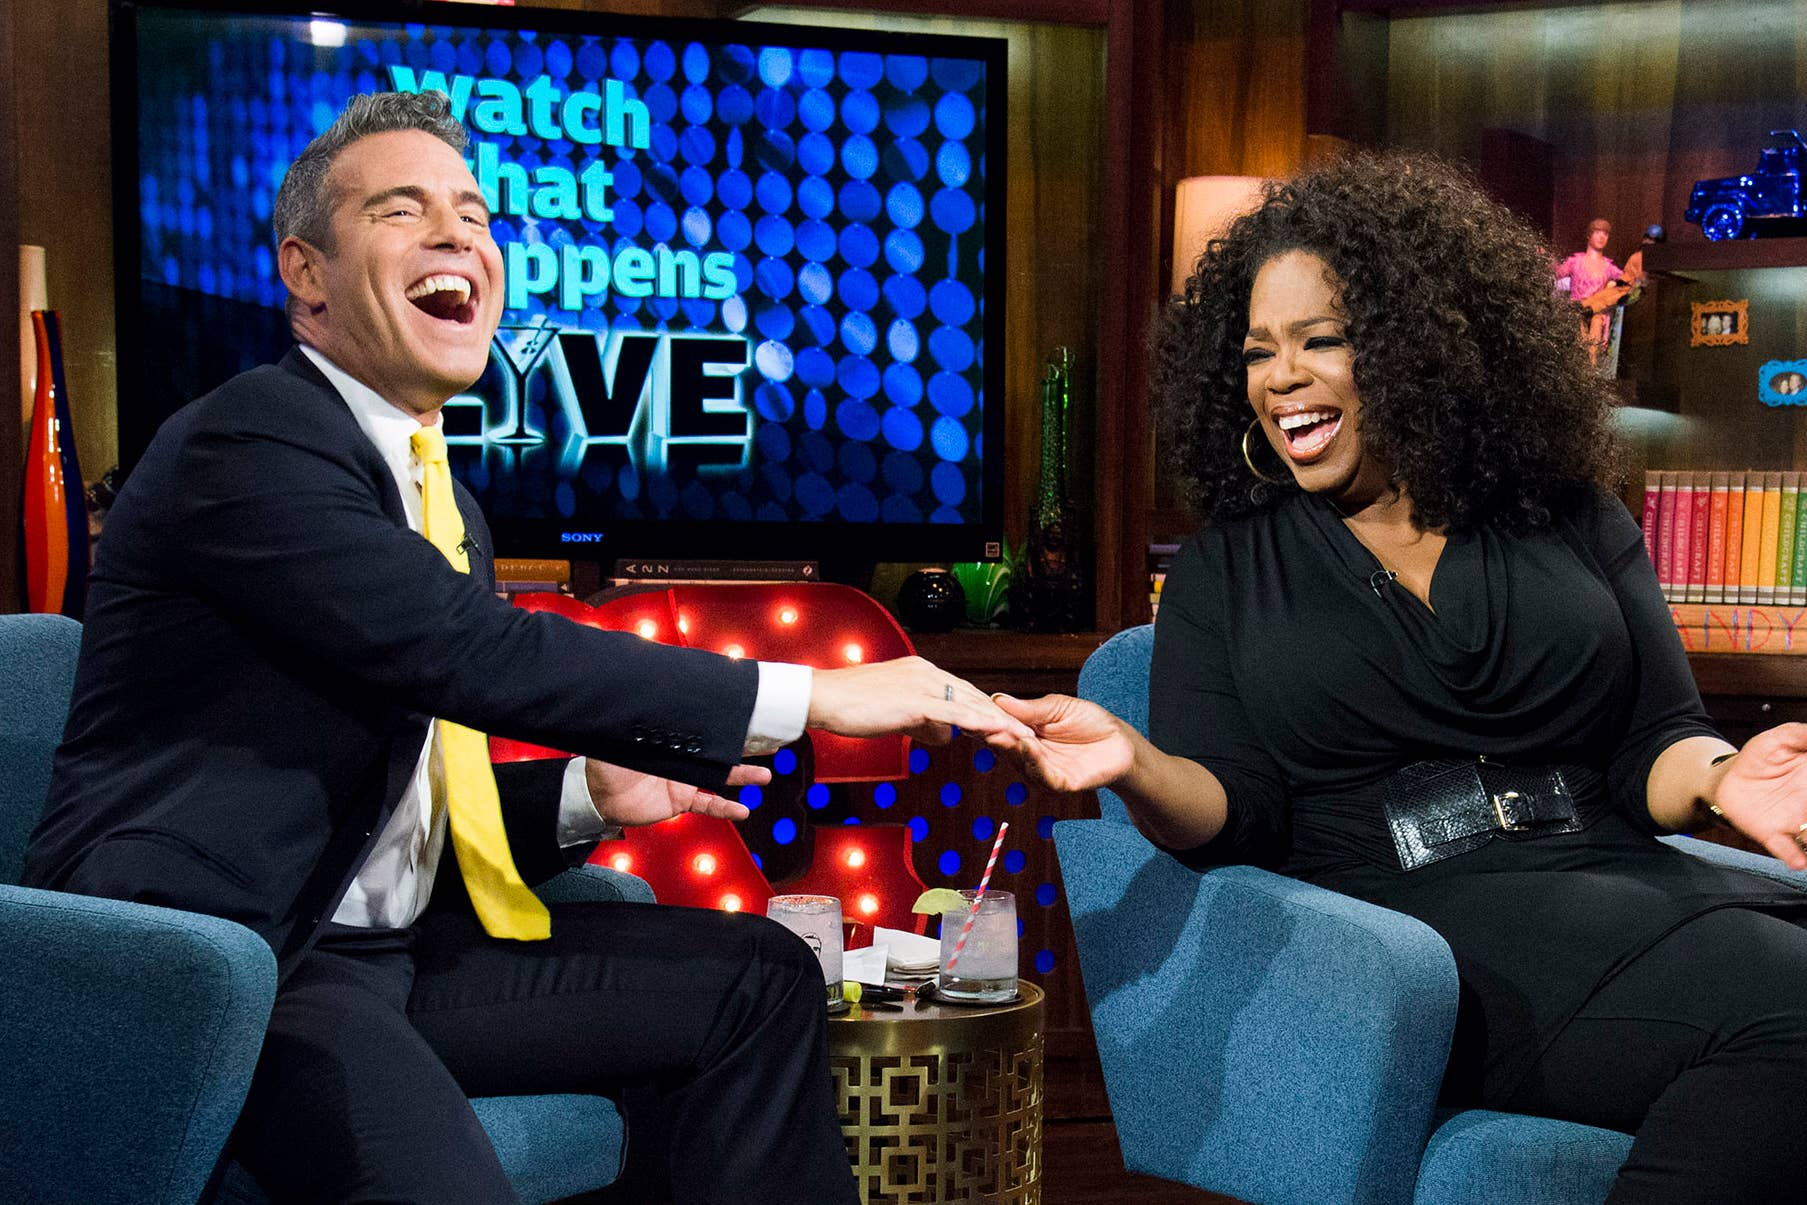 Andy Cohen and Oprah Winfrey chat and laugh on a brightly decorated talk show set on "Watch What Happens Live". Andy is in a suit, Oprah wears a stylish black outfit